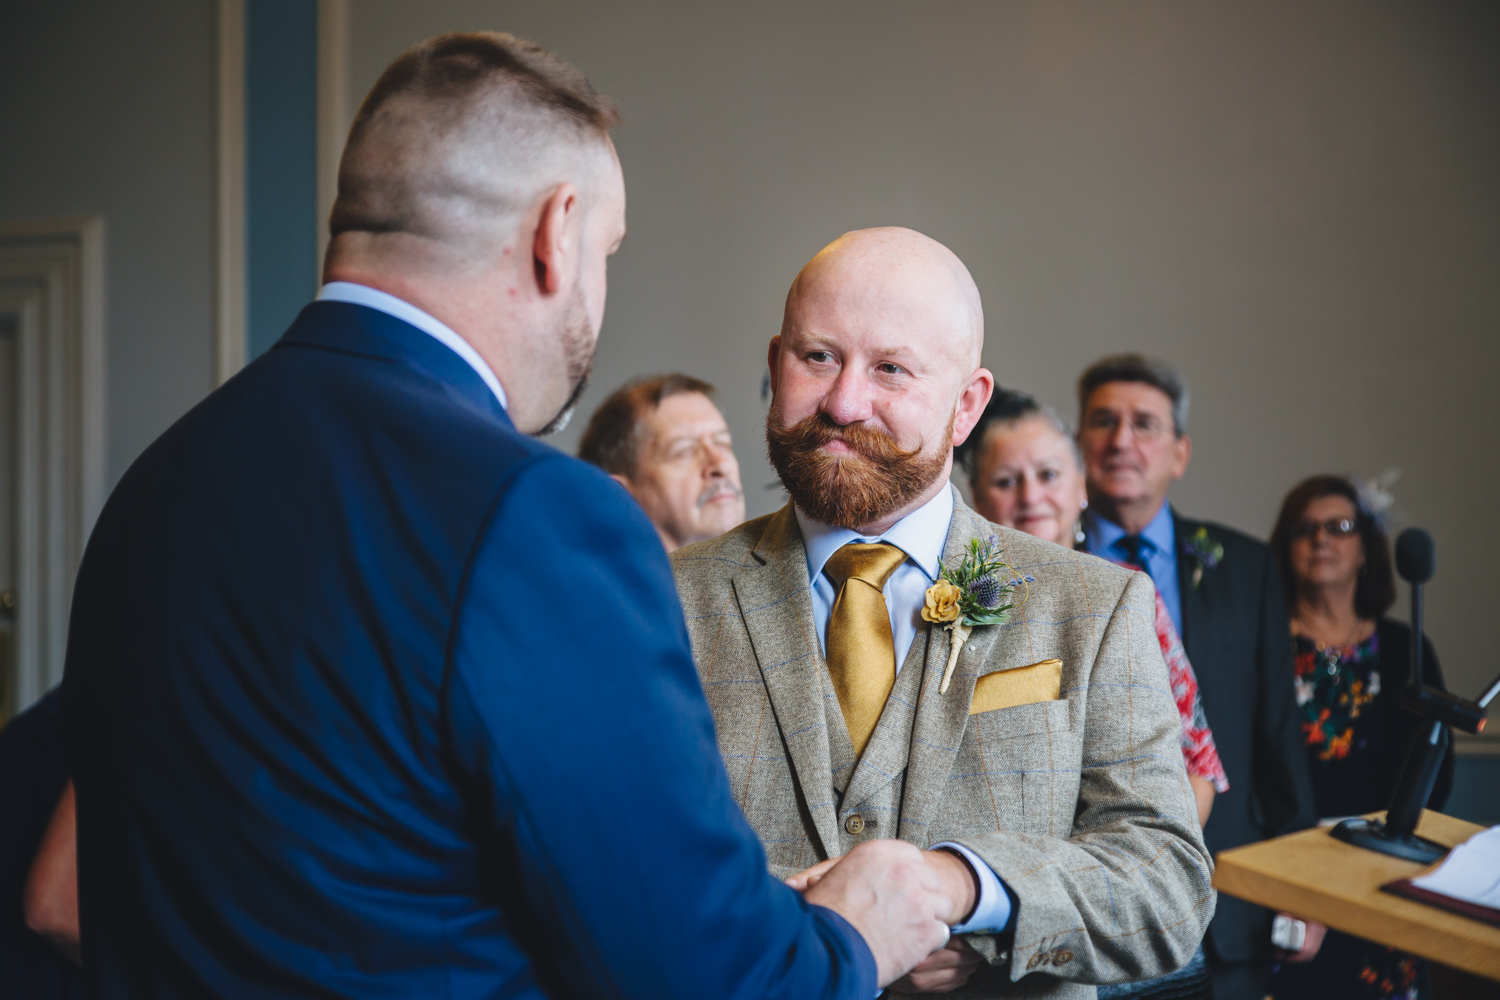 exchanging vows gay wedding ceremony at cardiff city hall with gay friendly south wales wedding photographer